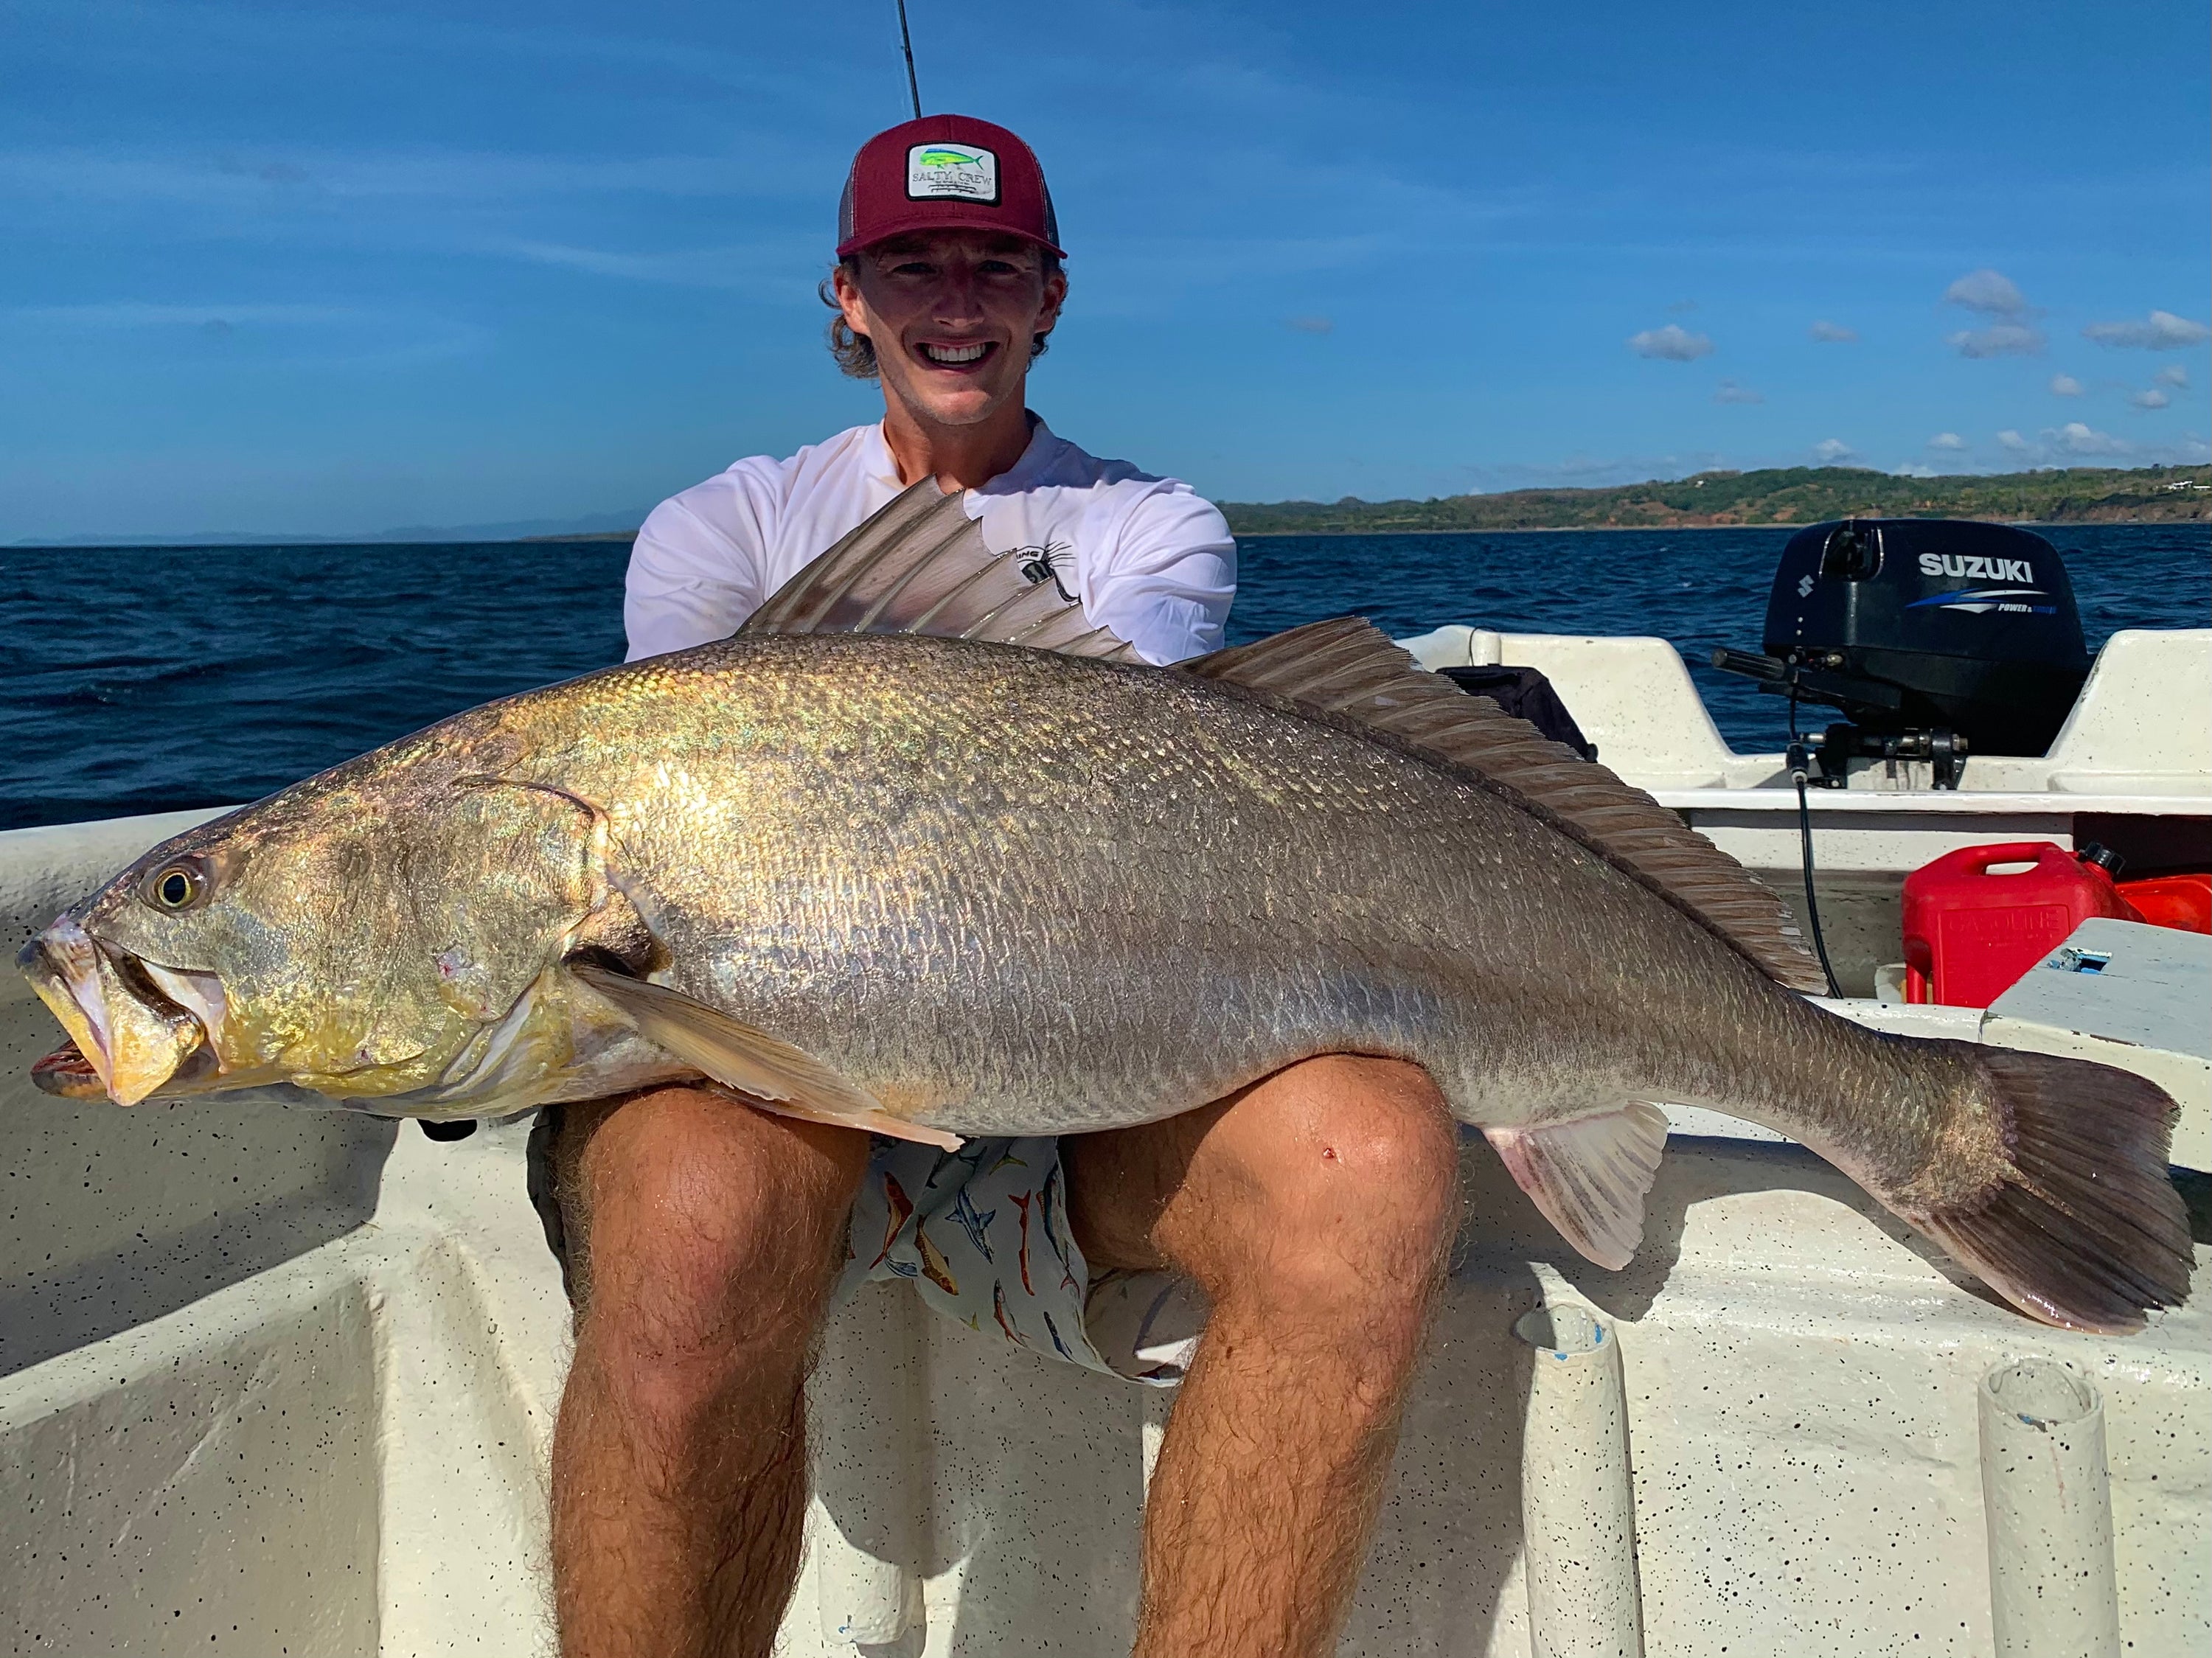 Kieren with a Corvina caught in Panama